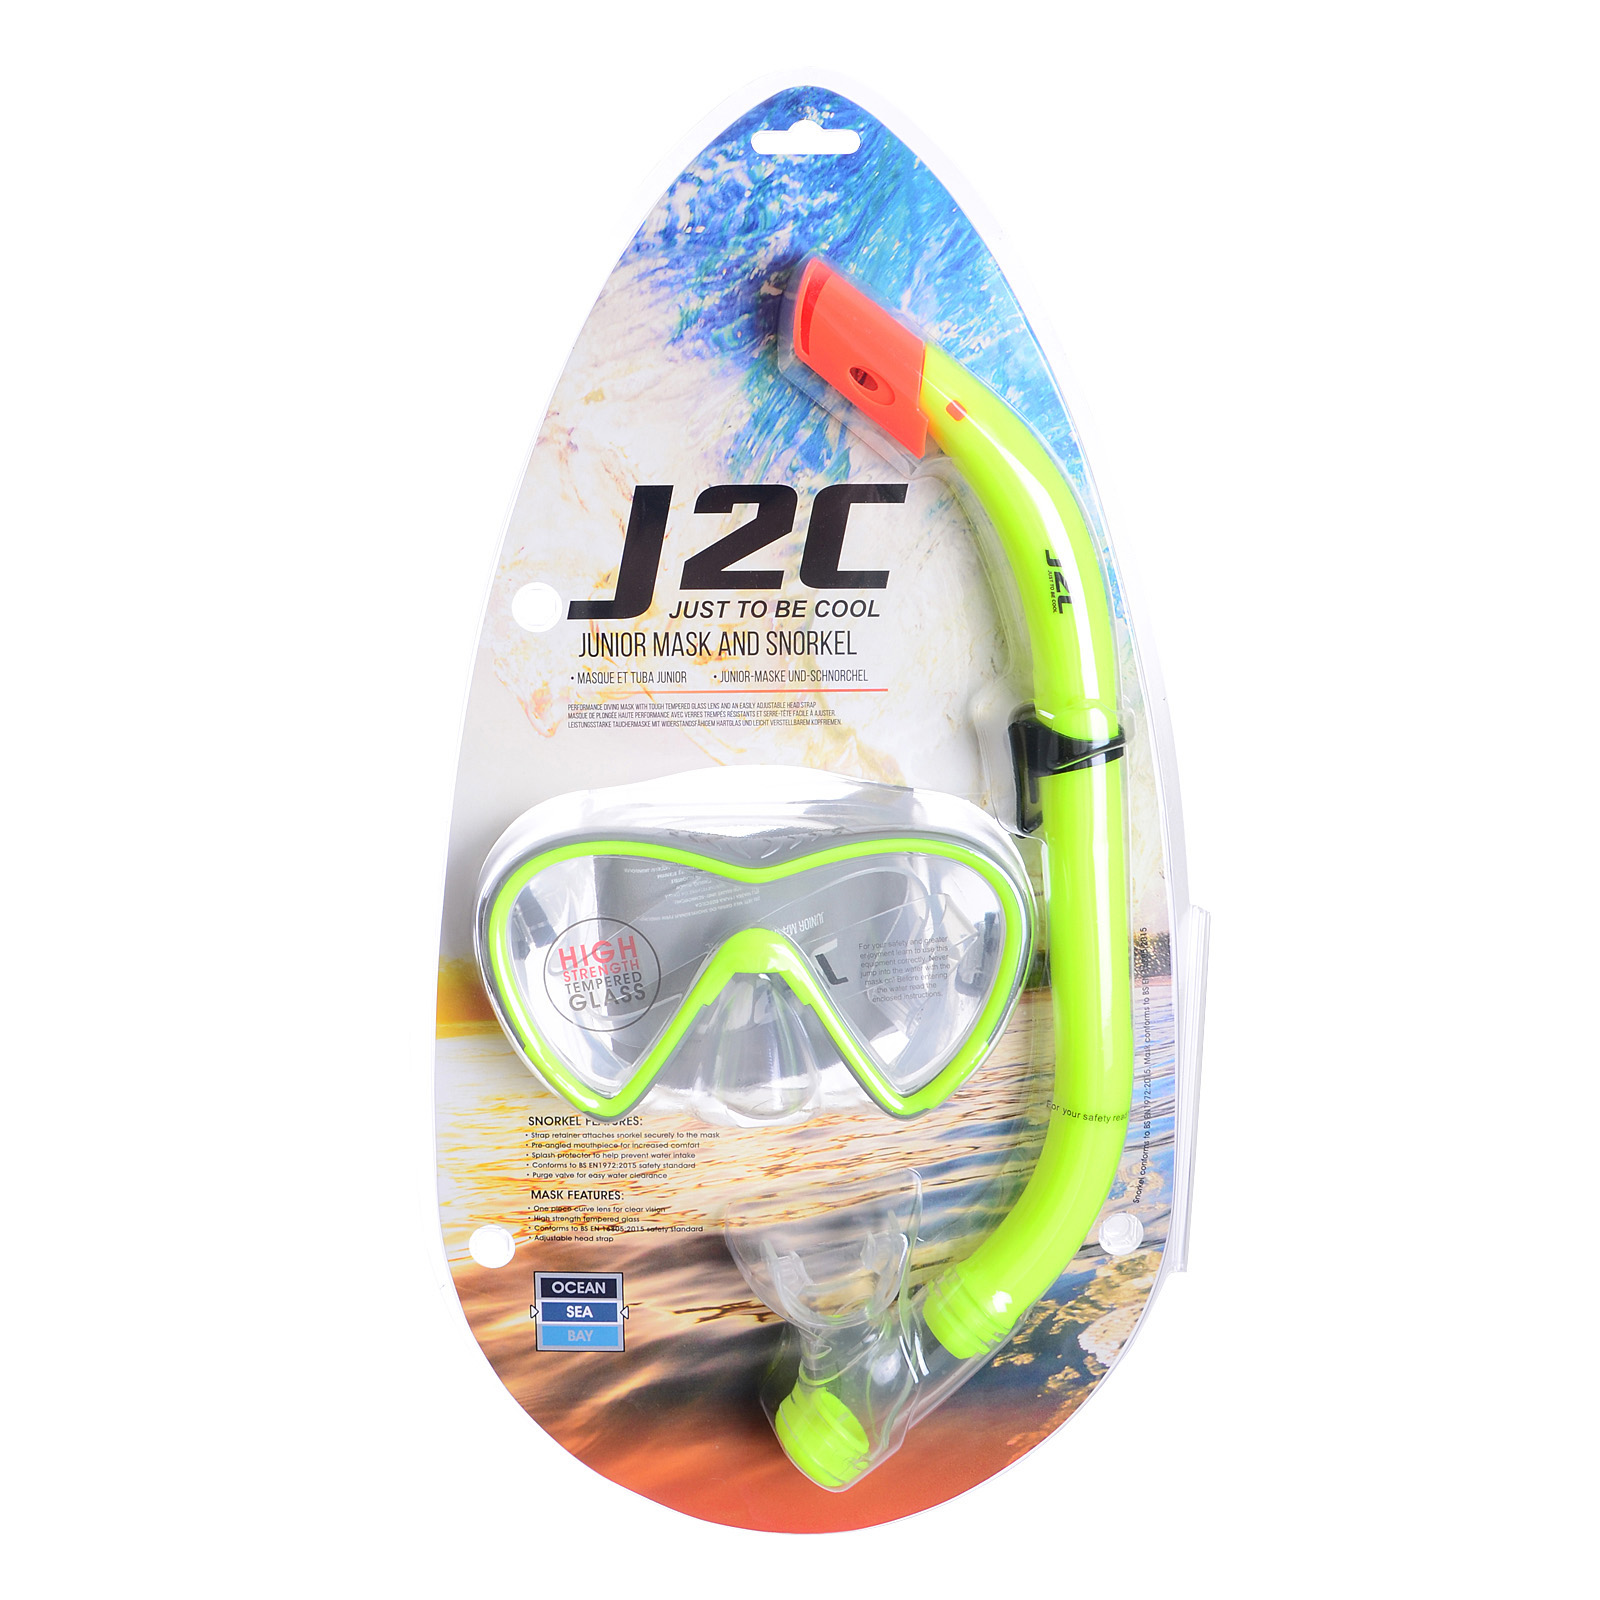 SET MASK AND SNORKEL And